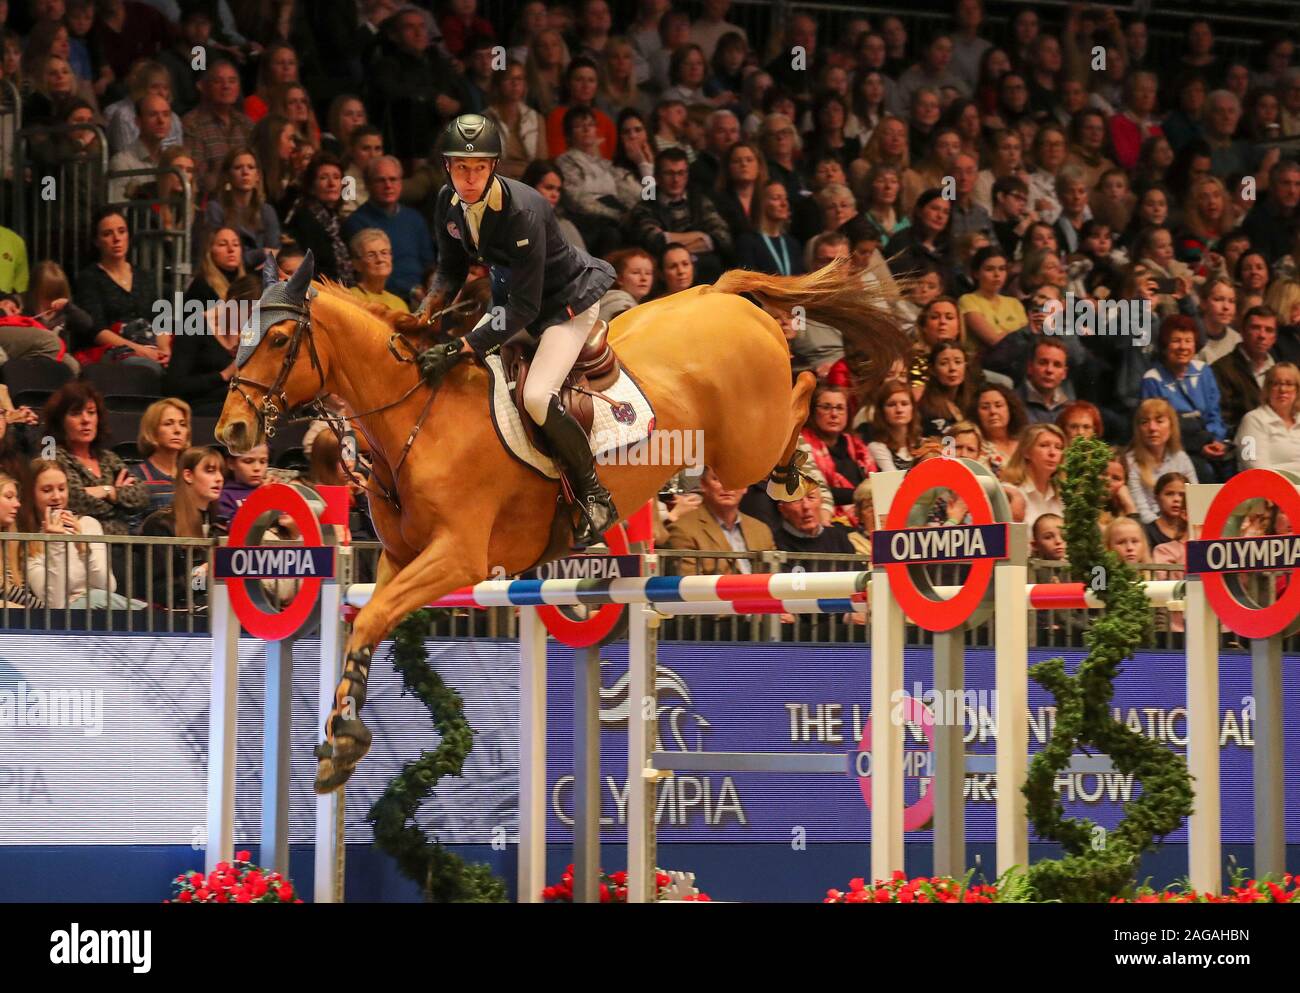 William Whitaker riding RMF Echo competes in the Santa stakes during day three of The London International Horse Show at London Olympia. Stock Photo